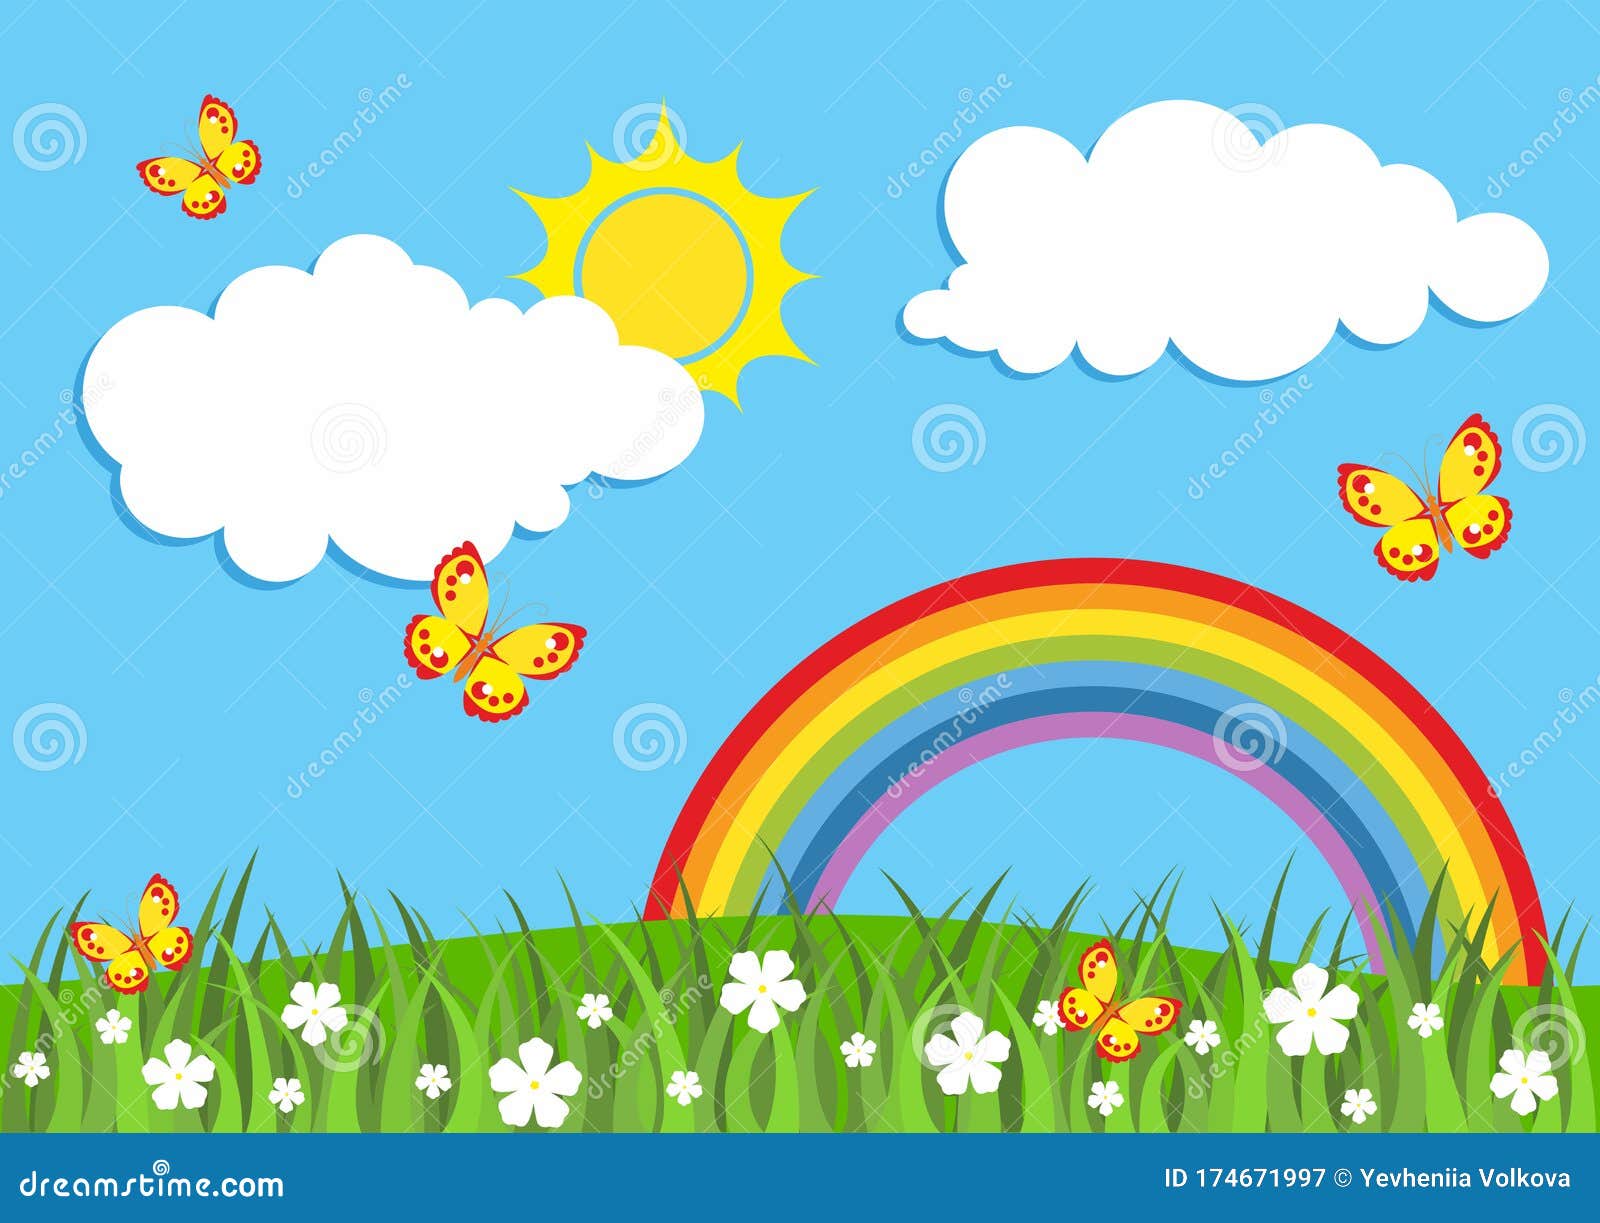 Spring Background with Rainbow. Rainbow with Clouds, Sun, Grass,  Butterflies and Flowers with Blue Sky Stock Vector - Illustration of comic,  artistic: 174671997